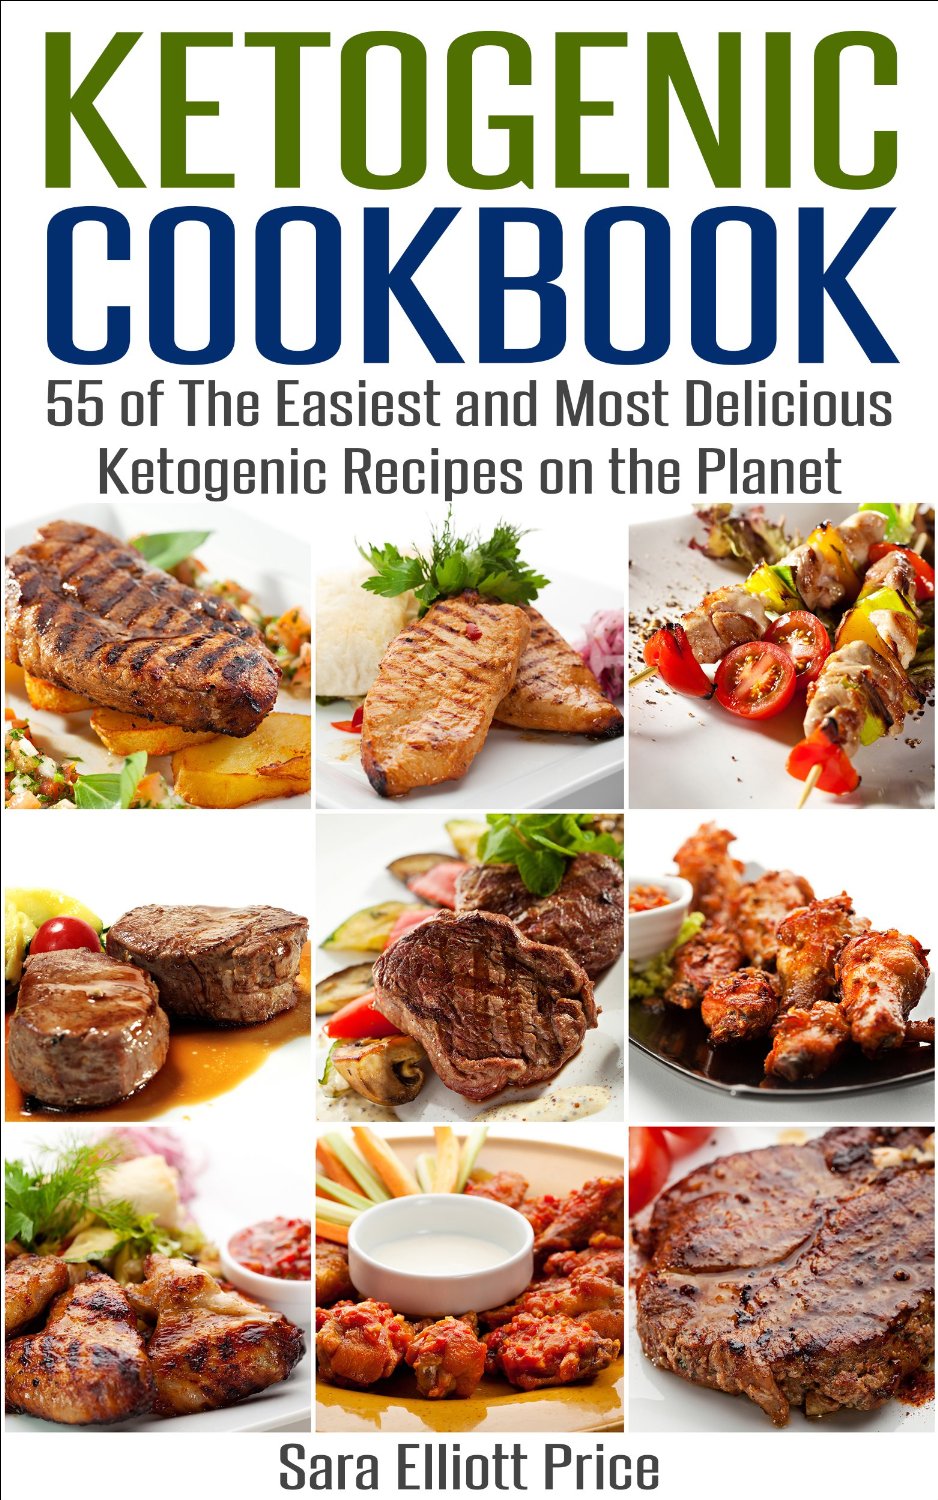 FREE: Ketogenic Cookbook: 55 of The Easiest and Most Delicious Ketogenic Recipes on the Planet by Sara Elliott Price